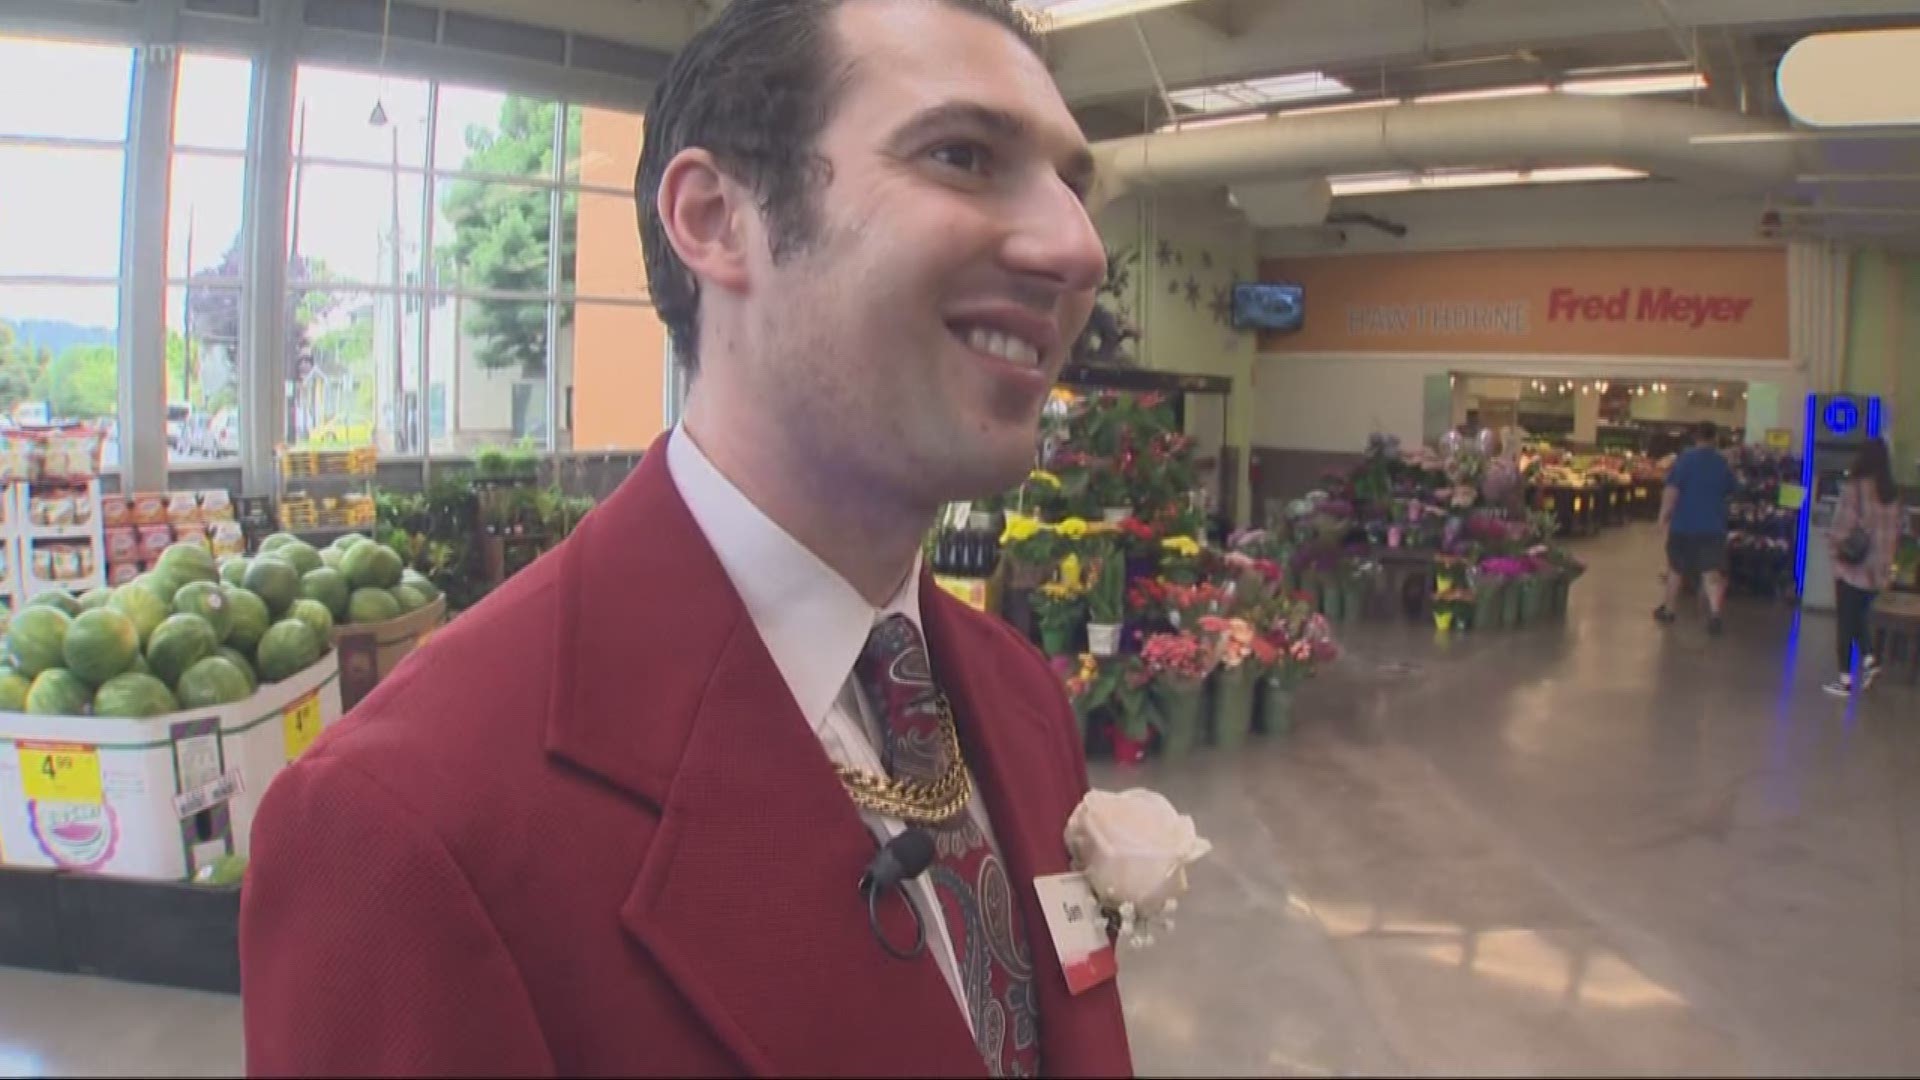 In this week's Those Who Serve, Pat Dooris re-introduces us to Sam Sherer, a greeter at the SE Hawthorne Fred Meyer. After seeing our first story, his community created a GoFundMe account to help this sharp dresser go to fashion school.